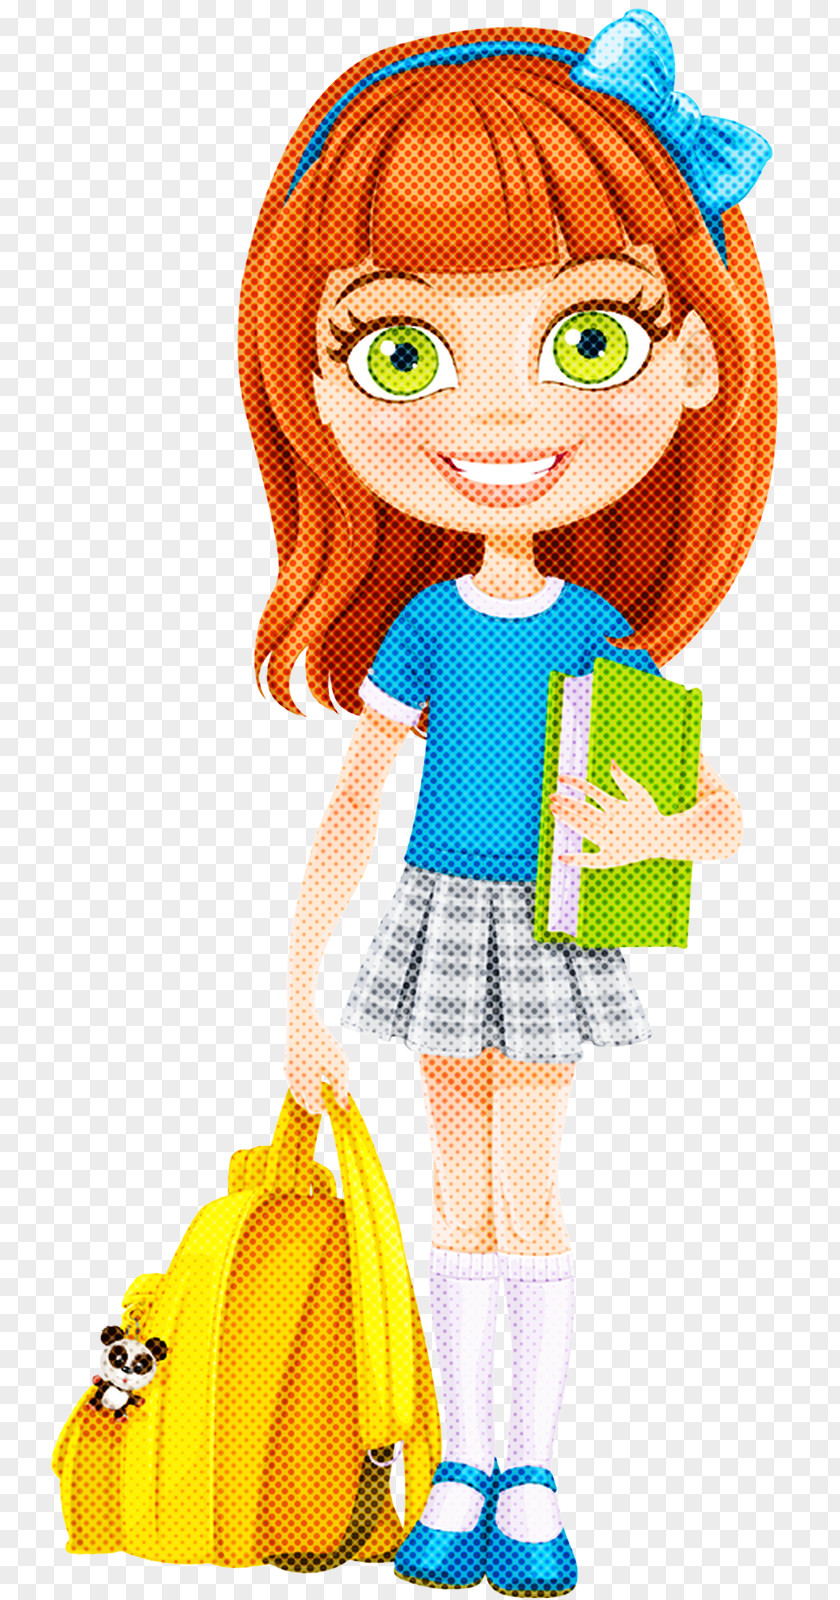 Fictional Character Style Cartoon Clip Art Fashion Illustration PNG